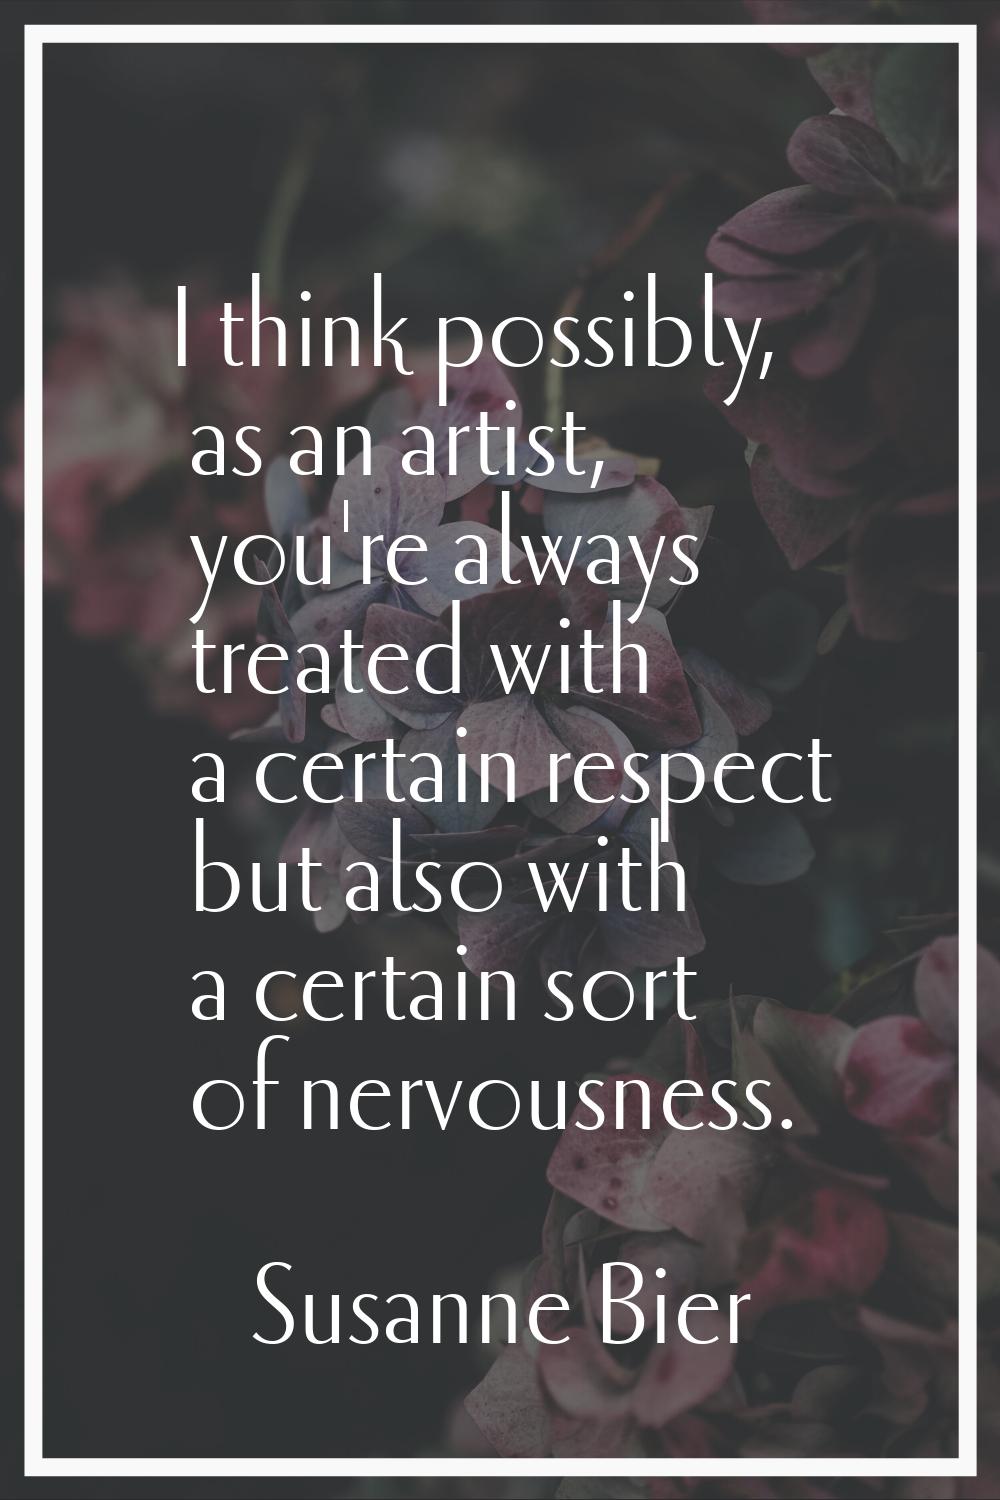 I think possibly, as an artist, you're always treated with a certain respect but also with a certai